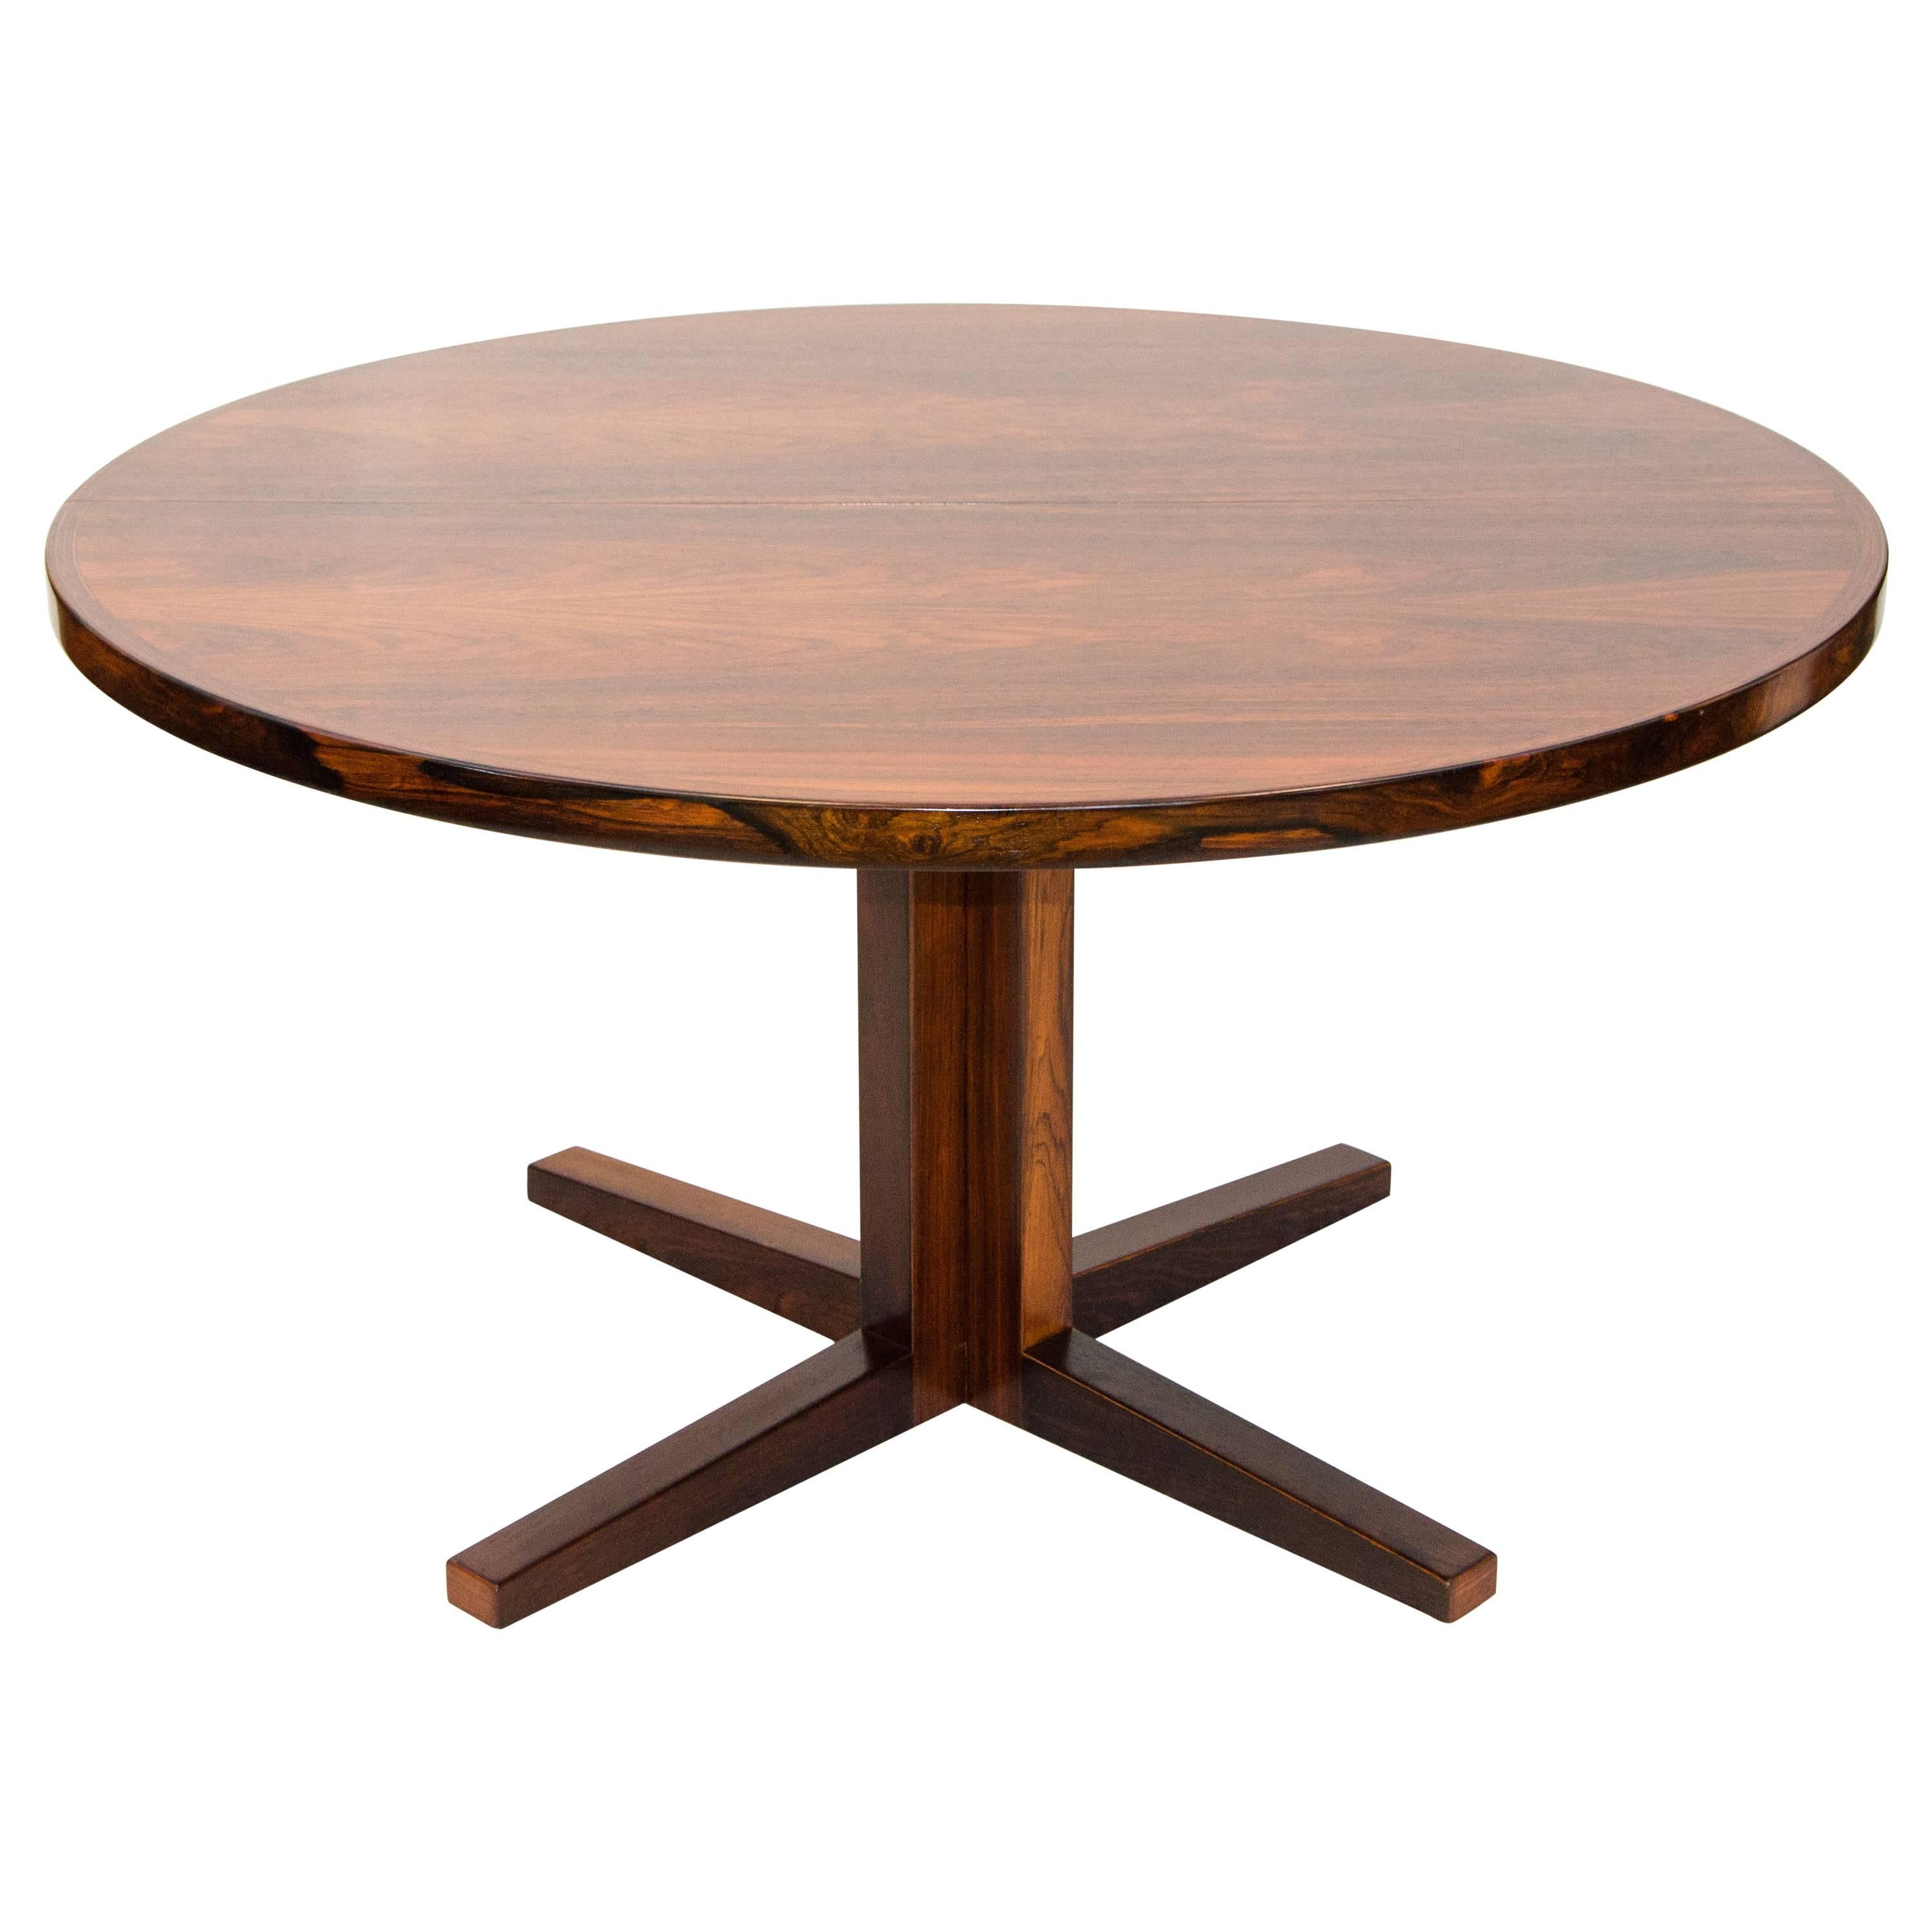 Danish Rosewood Round Pedestal Dining Table, One Leaf